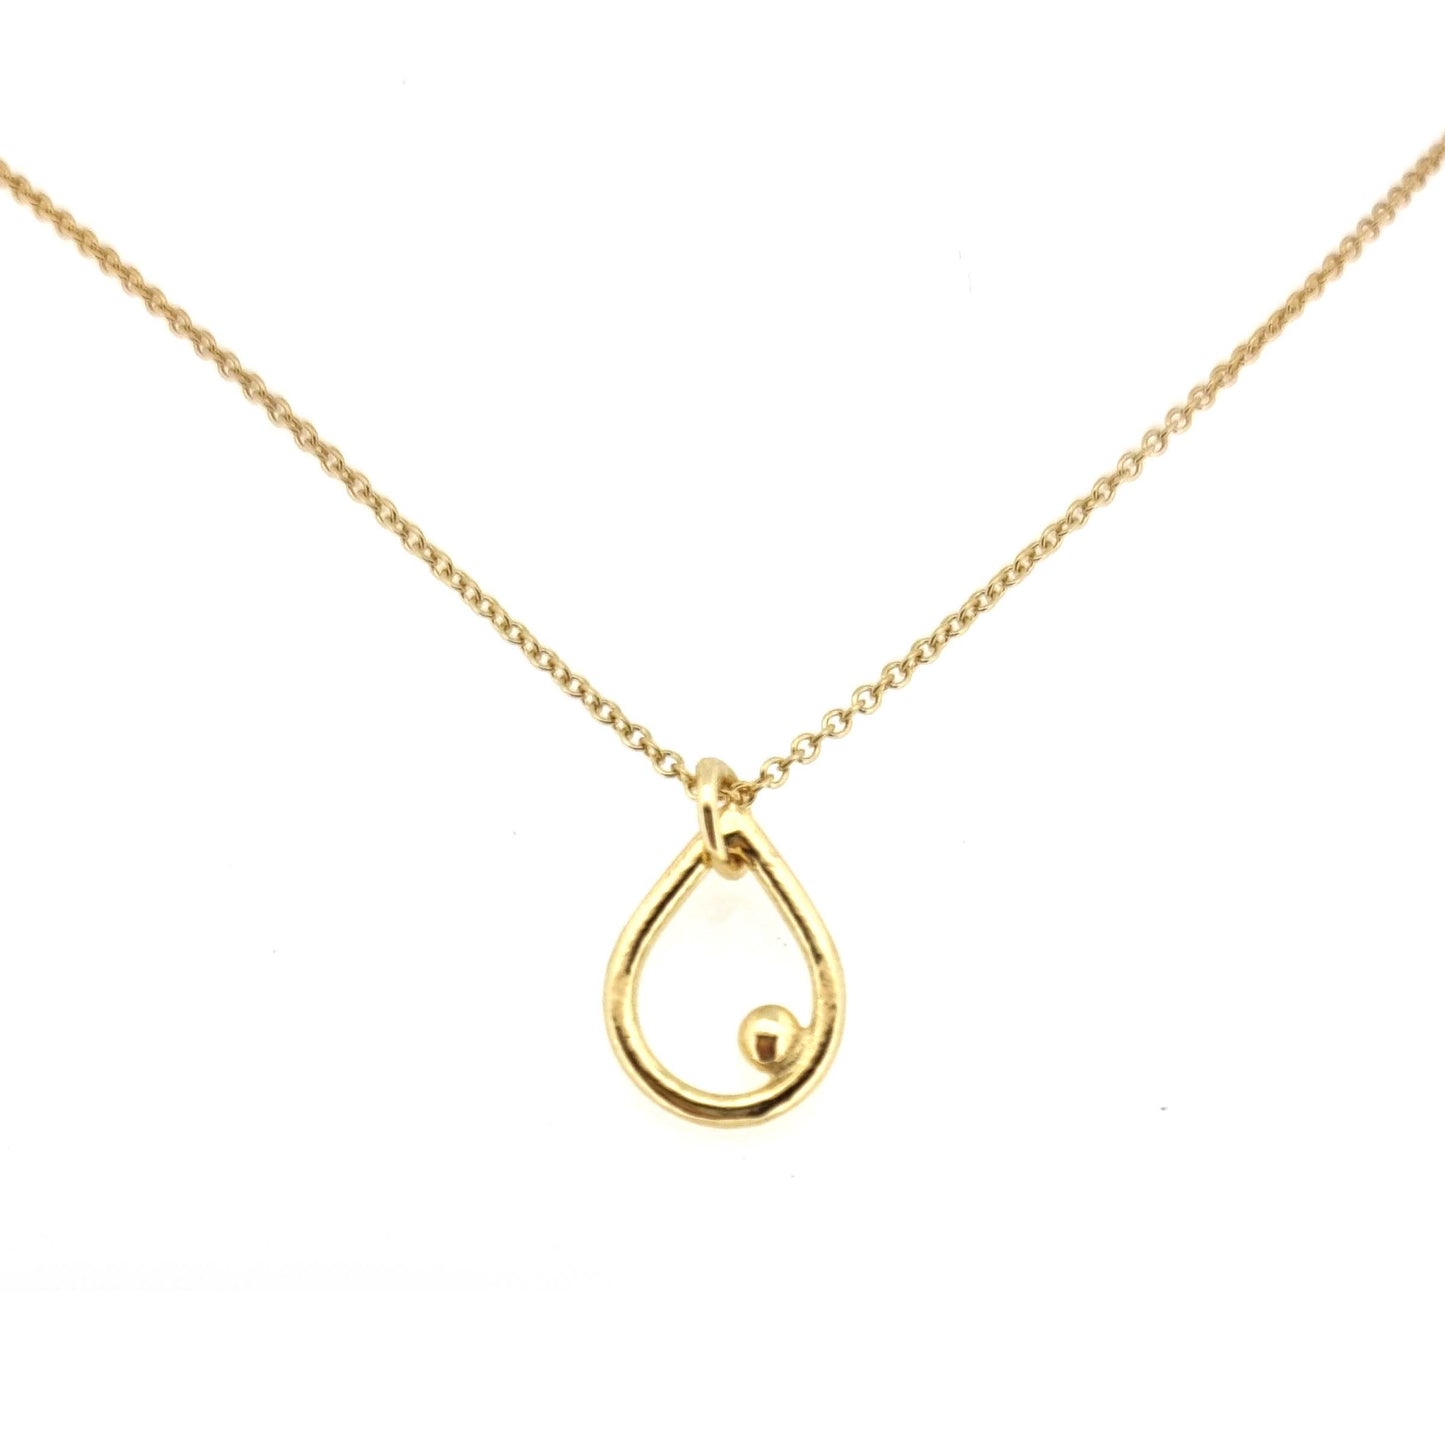 Yellow gold vermeil open teardrop shaped pendant with an off-centre ball on a yellow gold vermeil chain.